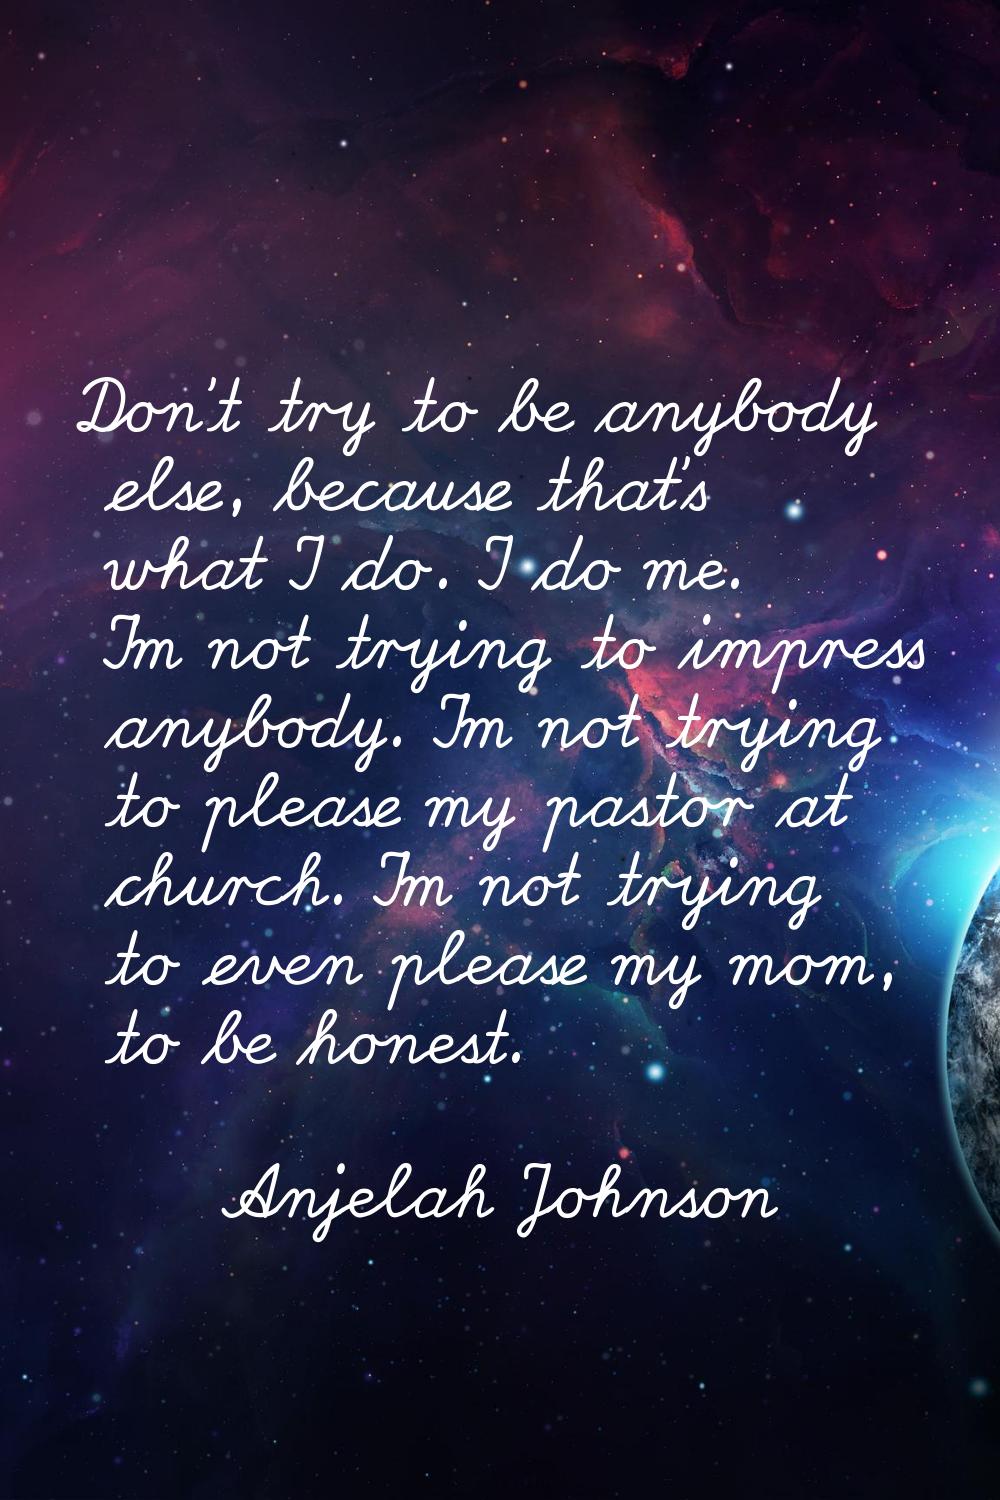 Don't try to be anybody else, because that's what I do. I do me. I'm not trying to impress anybody.